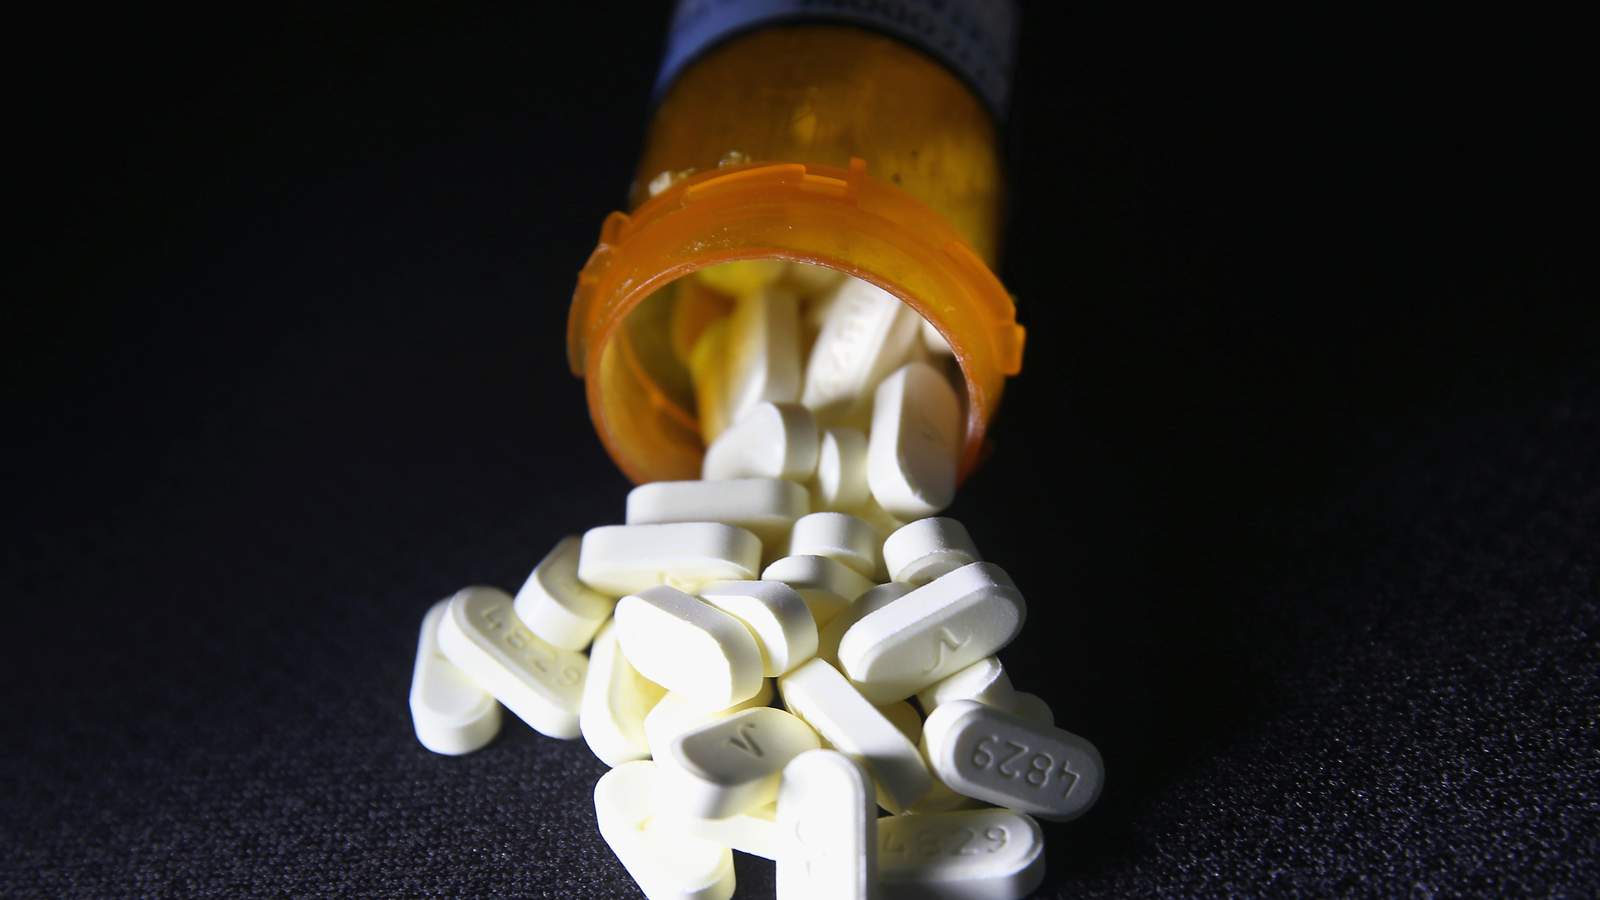 Michigan receives $80M in federal funding to respond to ongoing opioid crisis